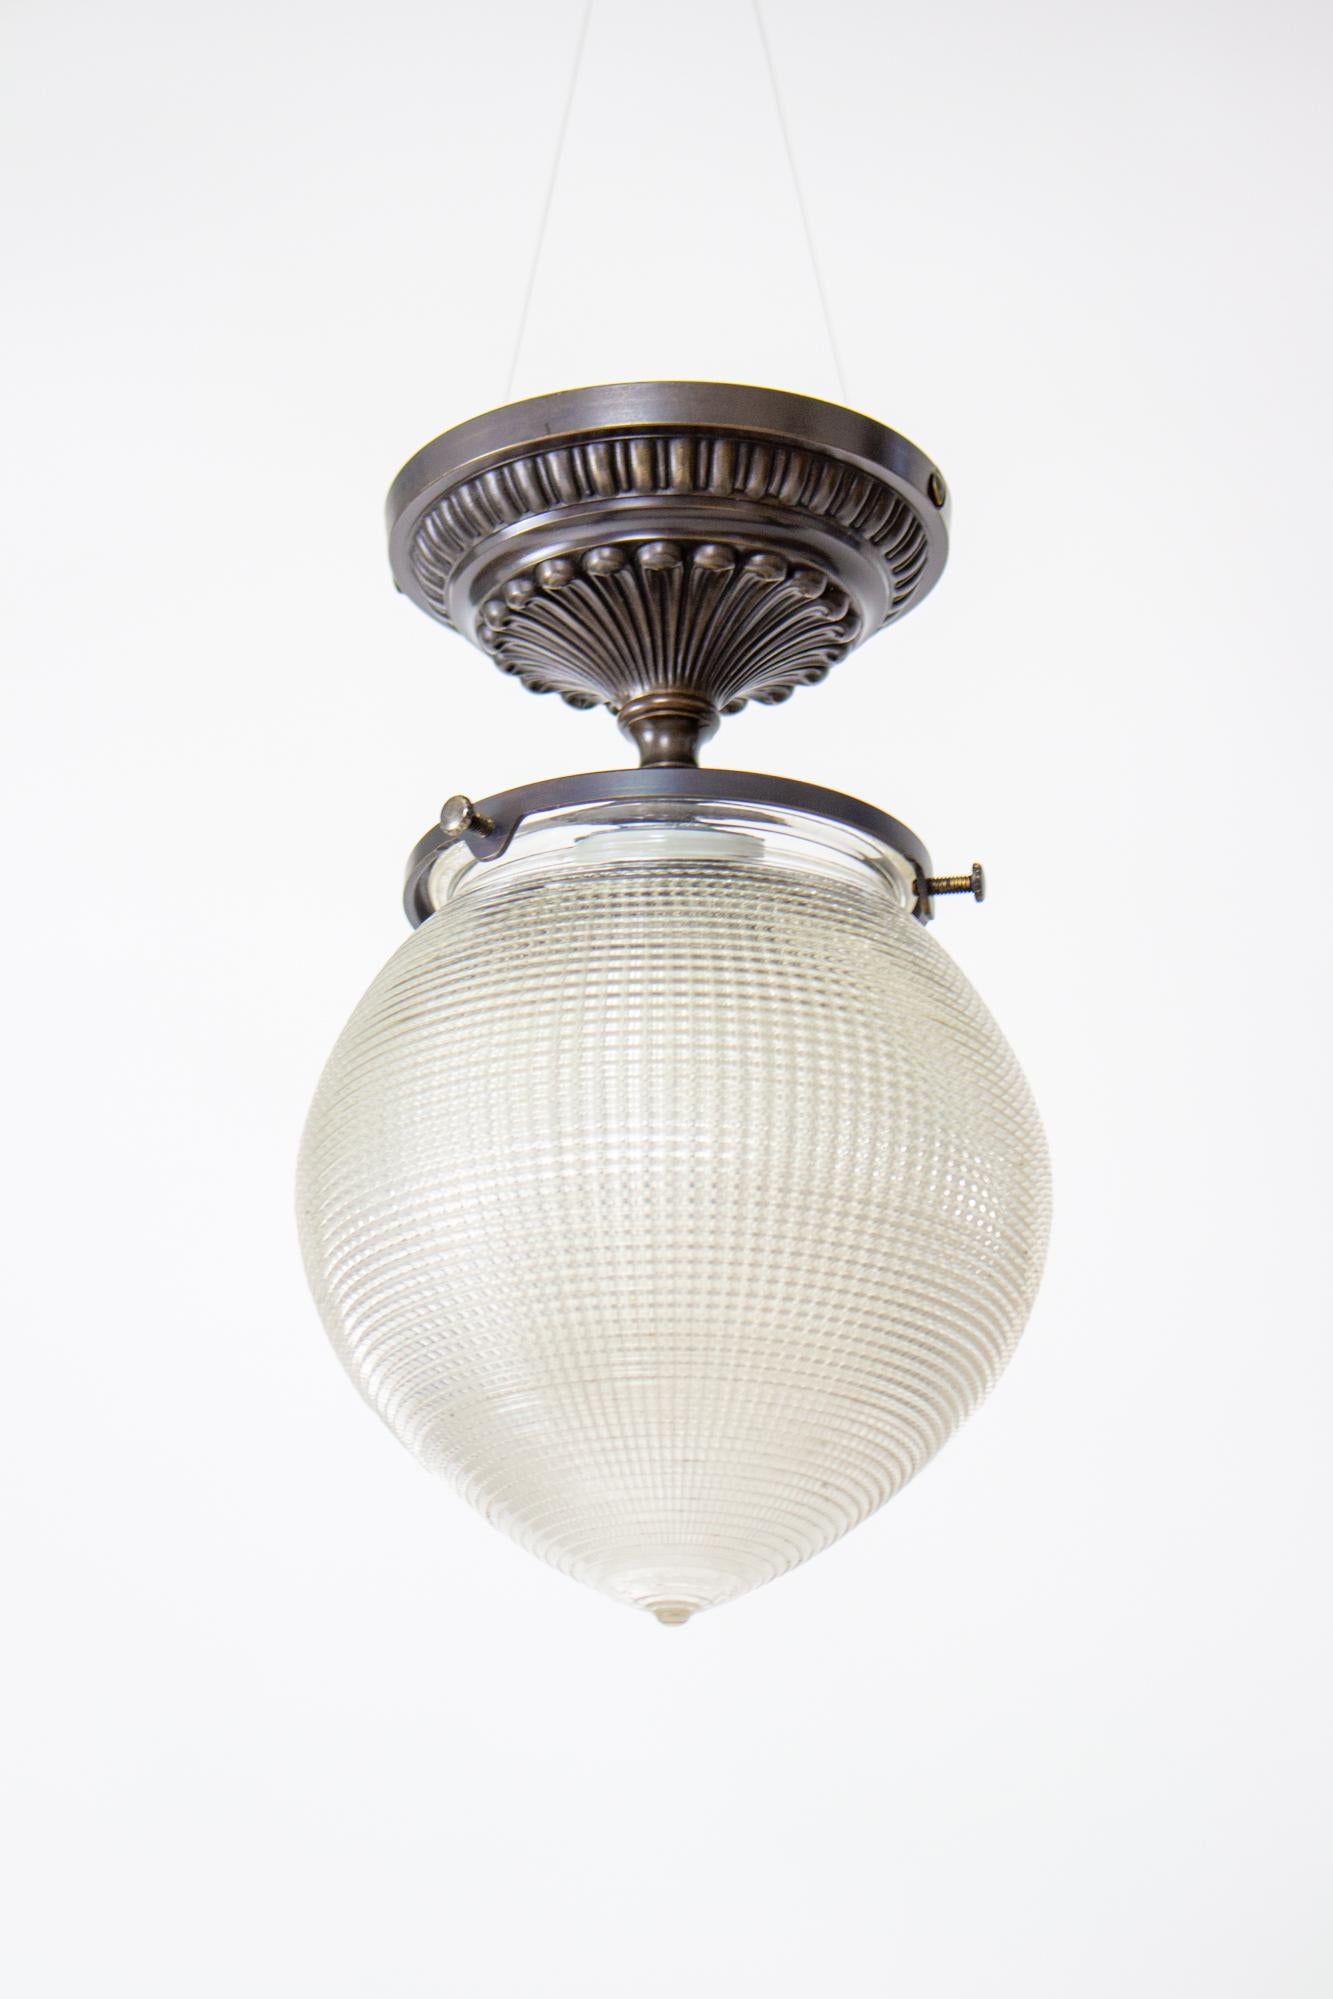 Industrial Early 20th Century Holophane Prismatic Flush Mount For Sale